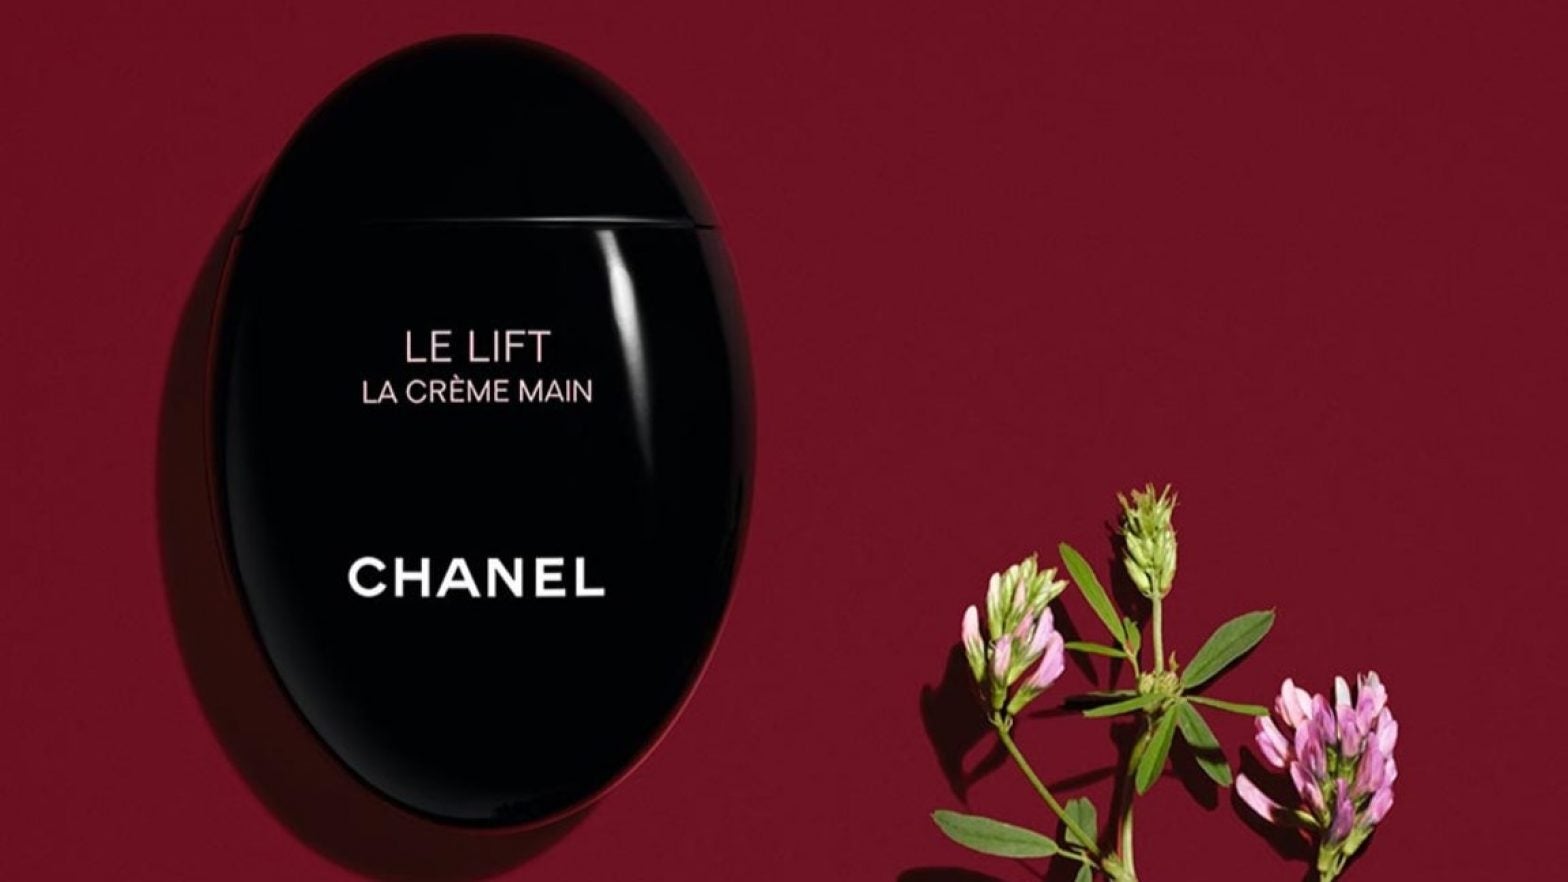 Add These 5 Luxury Beauty Items To Your Handbag